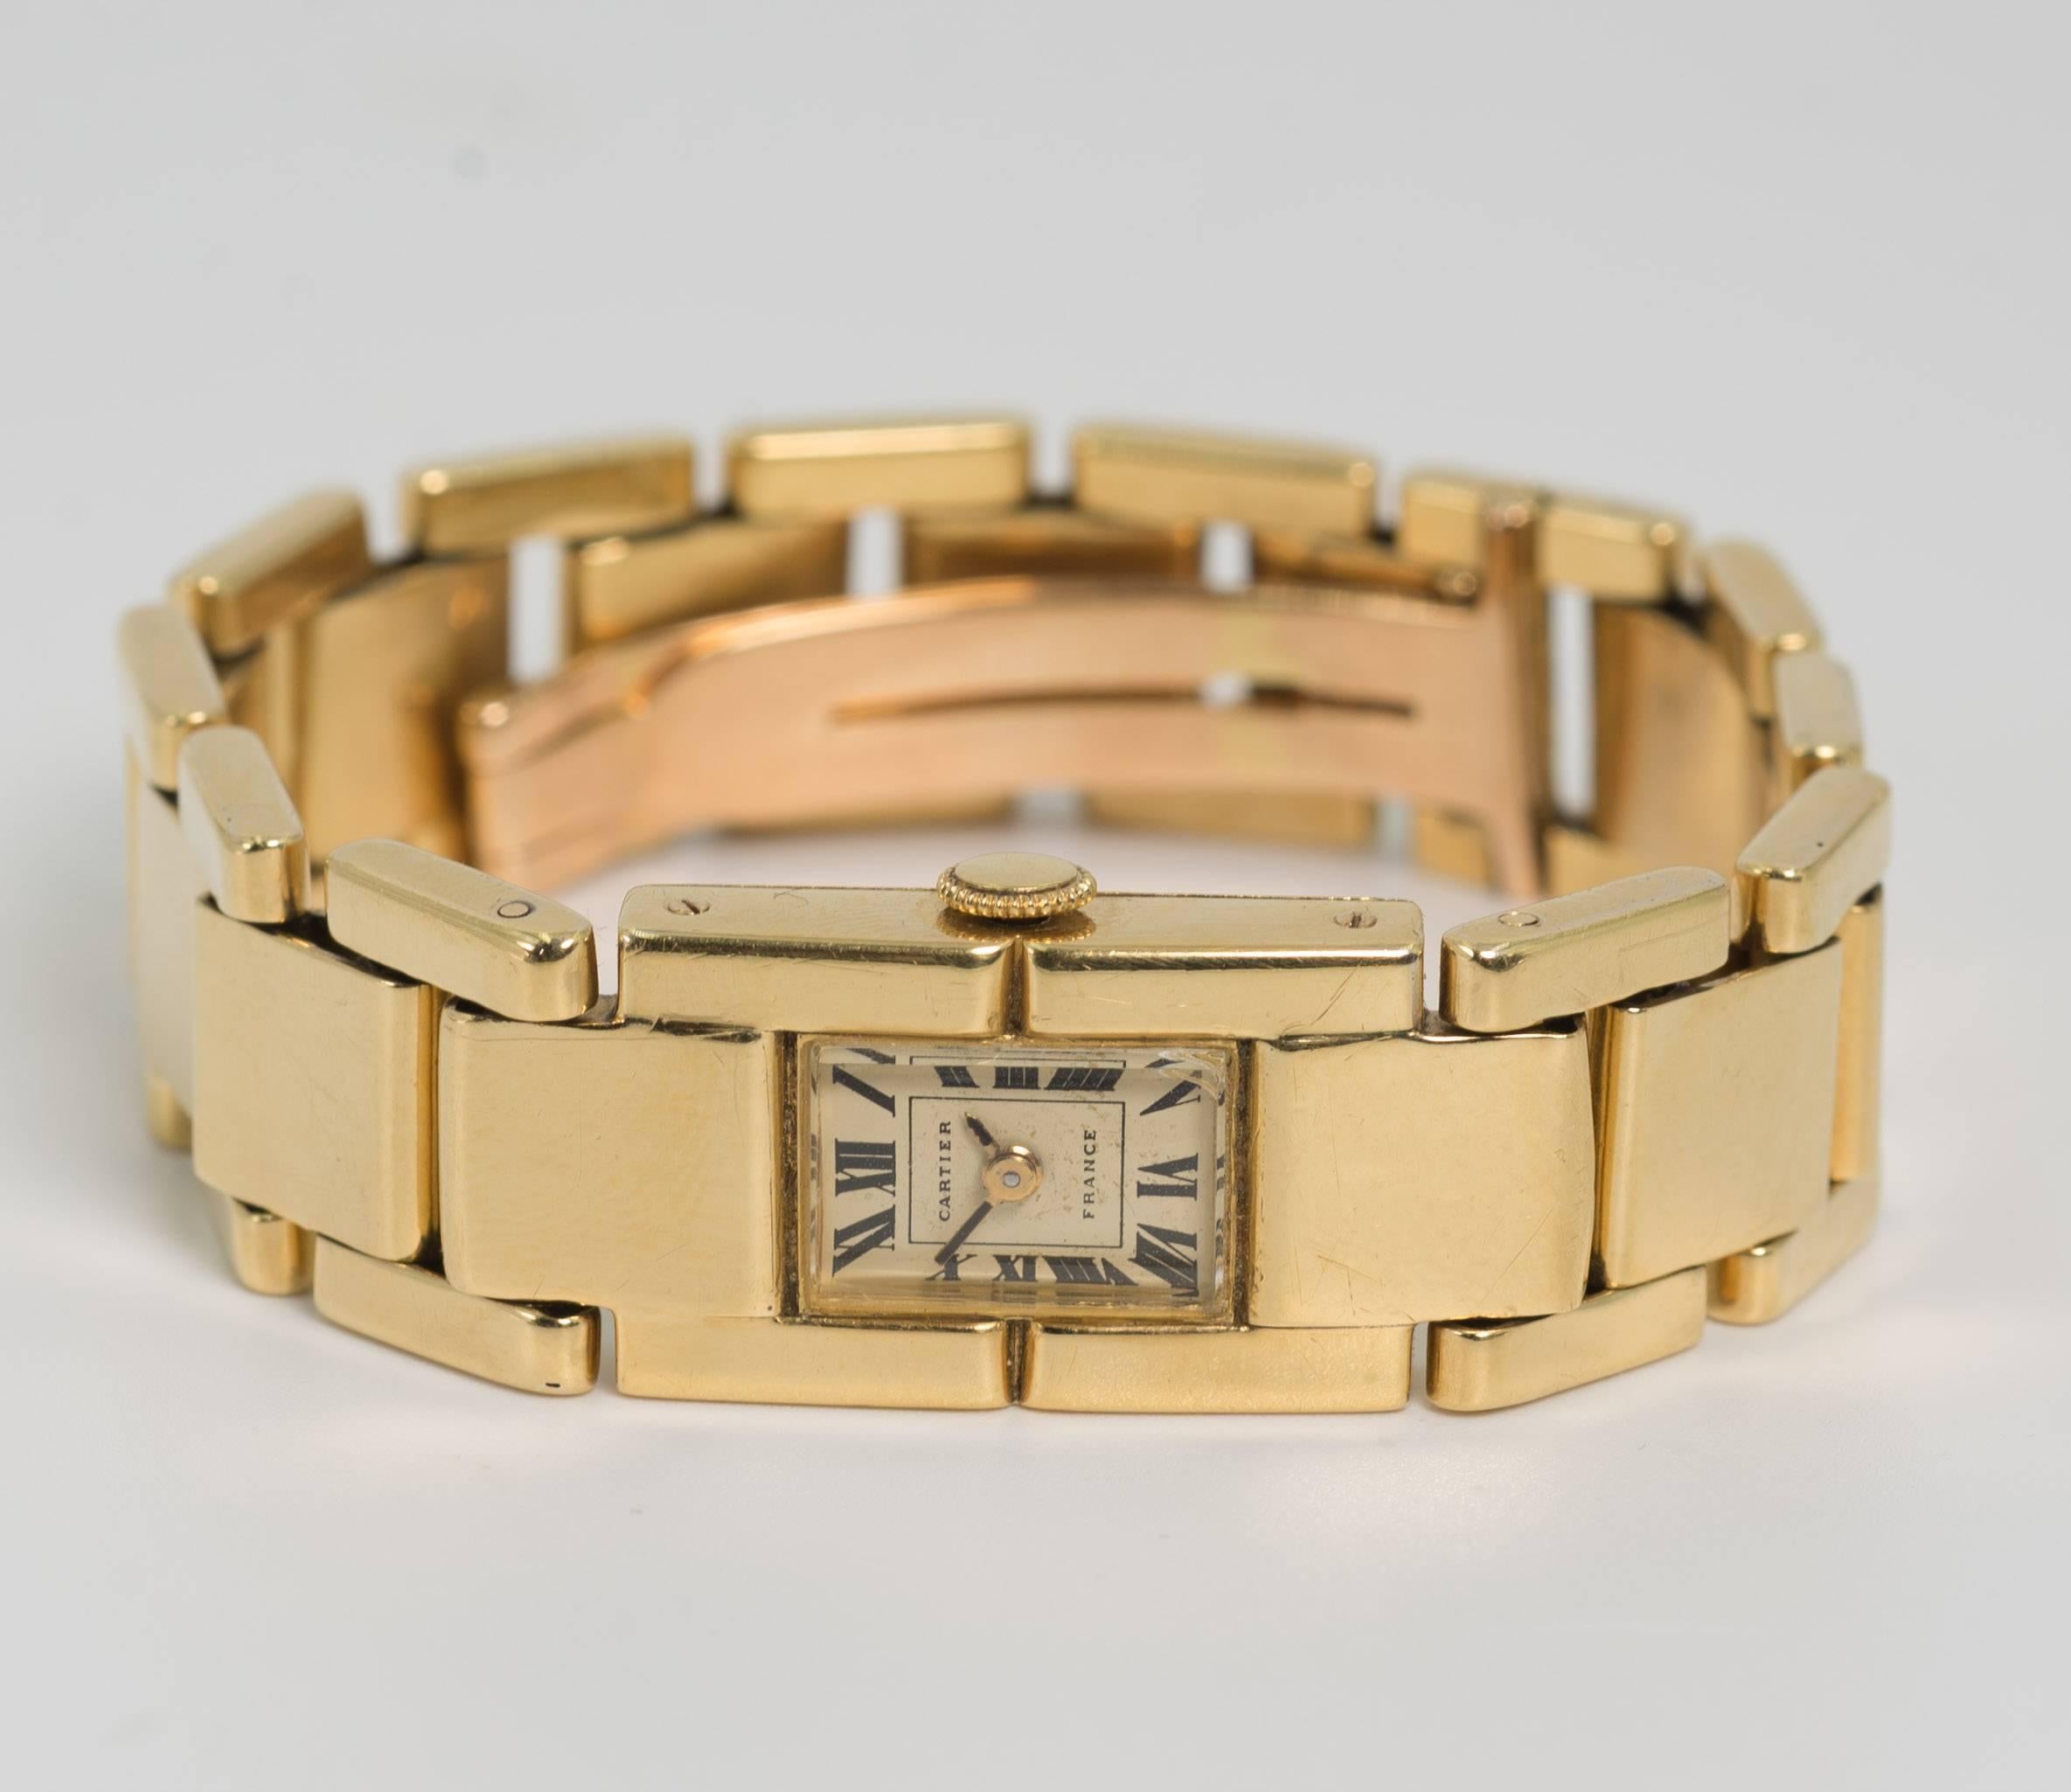 Rare Cartier Art Deco 1929 18karat gold brick bracelet Tank watch original very good estate condition. The rare bracelet is true Tank treads pattern. The dial is totally original and is stamped Cartier France. Both the watch and bracelet maintain